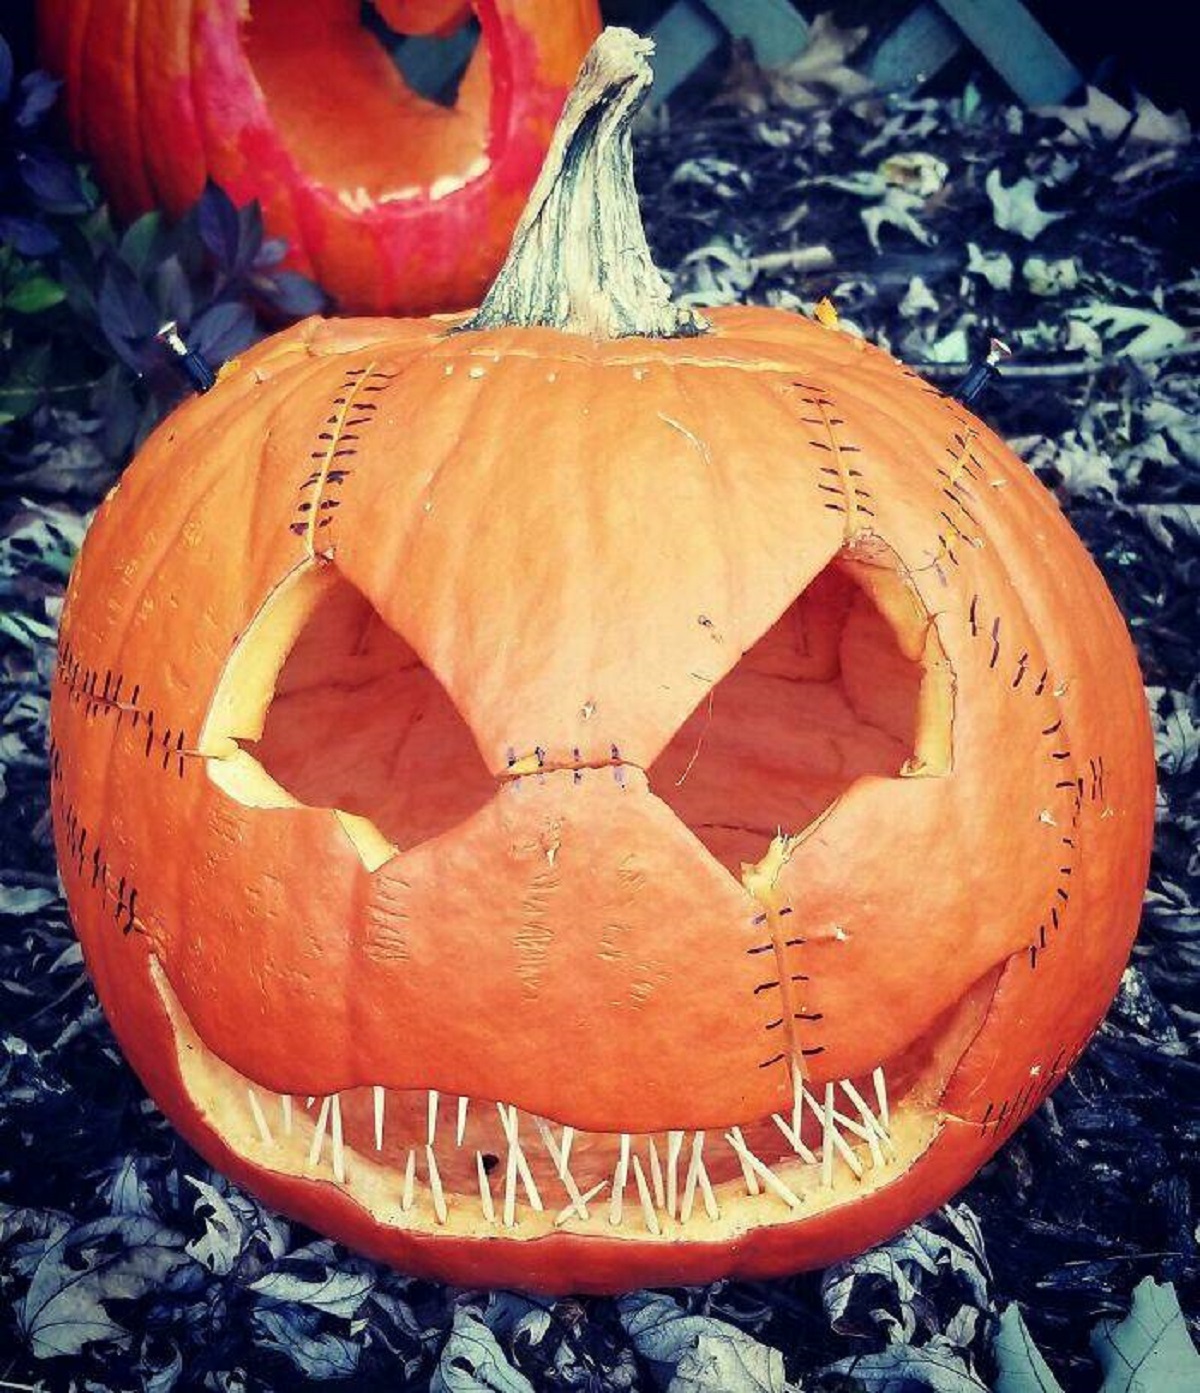 "Someone Smashed My Daughters Pumpkin Last Night So I Did Some Surgery After She Left For School. Frankenpumpkin Lives!"